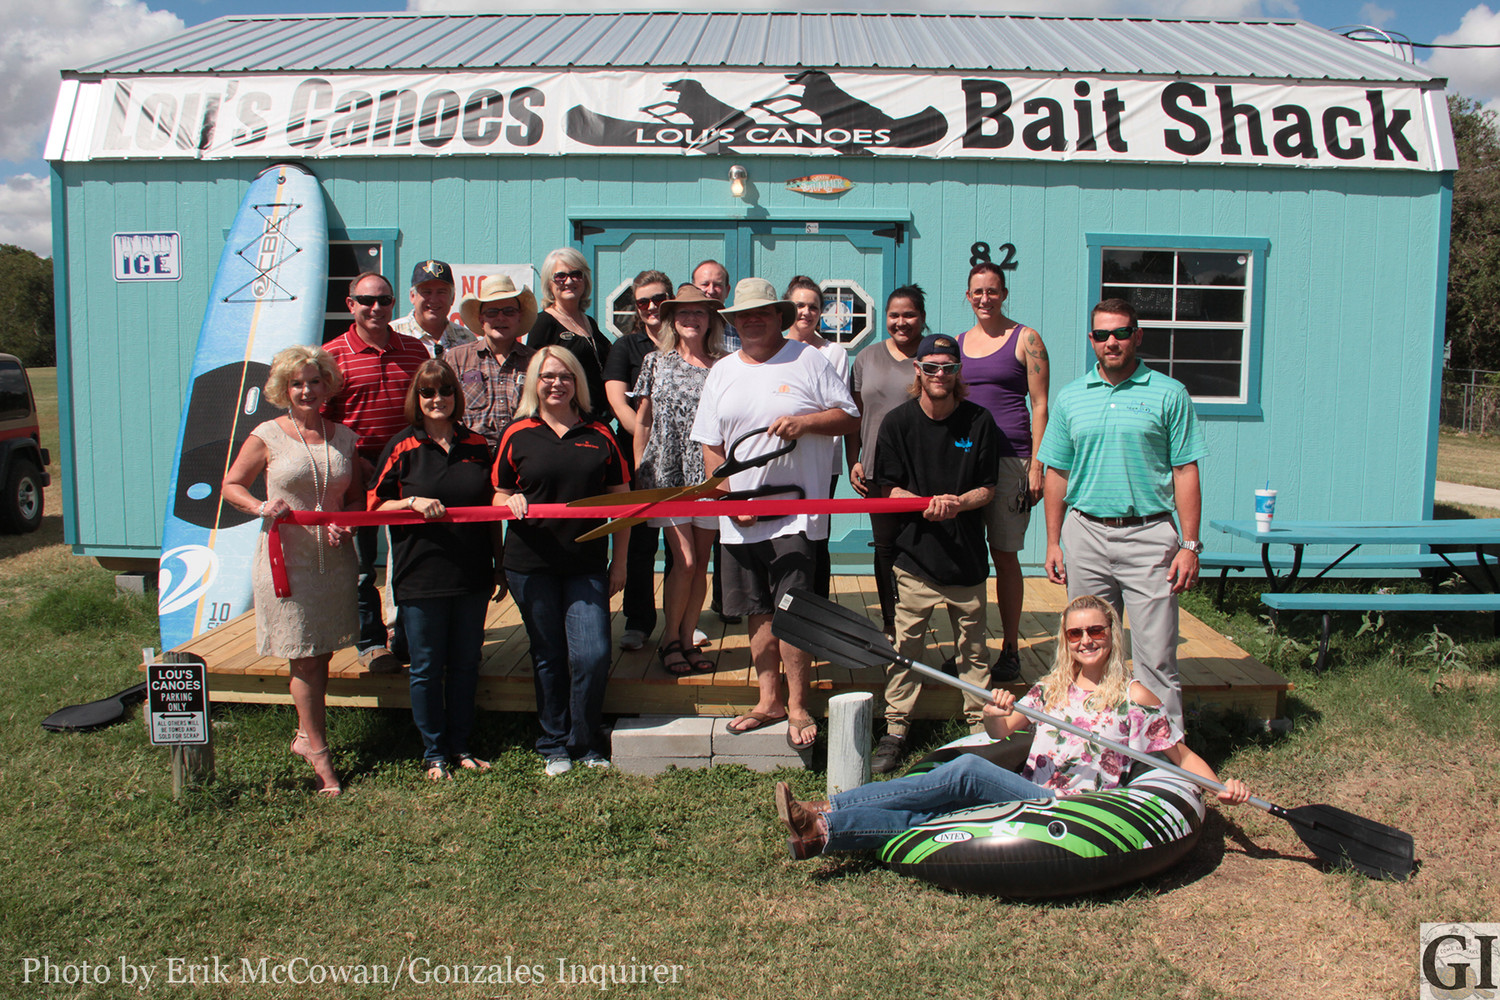 Owners Lou and Cheri Lane Garino of Lou's Canoes hosted a ribbon cutting for their business last week with the Gonzales Chamber of Commerce. The shack offers tube, canoe, and kayak rentals, as well as a selection of live and dead baits for fishing the Guadalupe. The Garinos hope to take advantage of the tourism opportunities on the river where currently none exist.